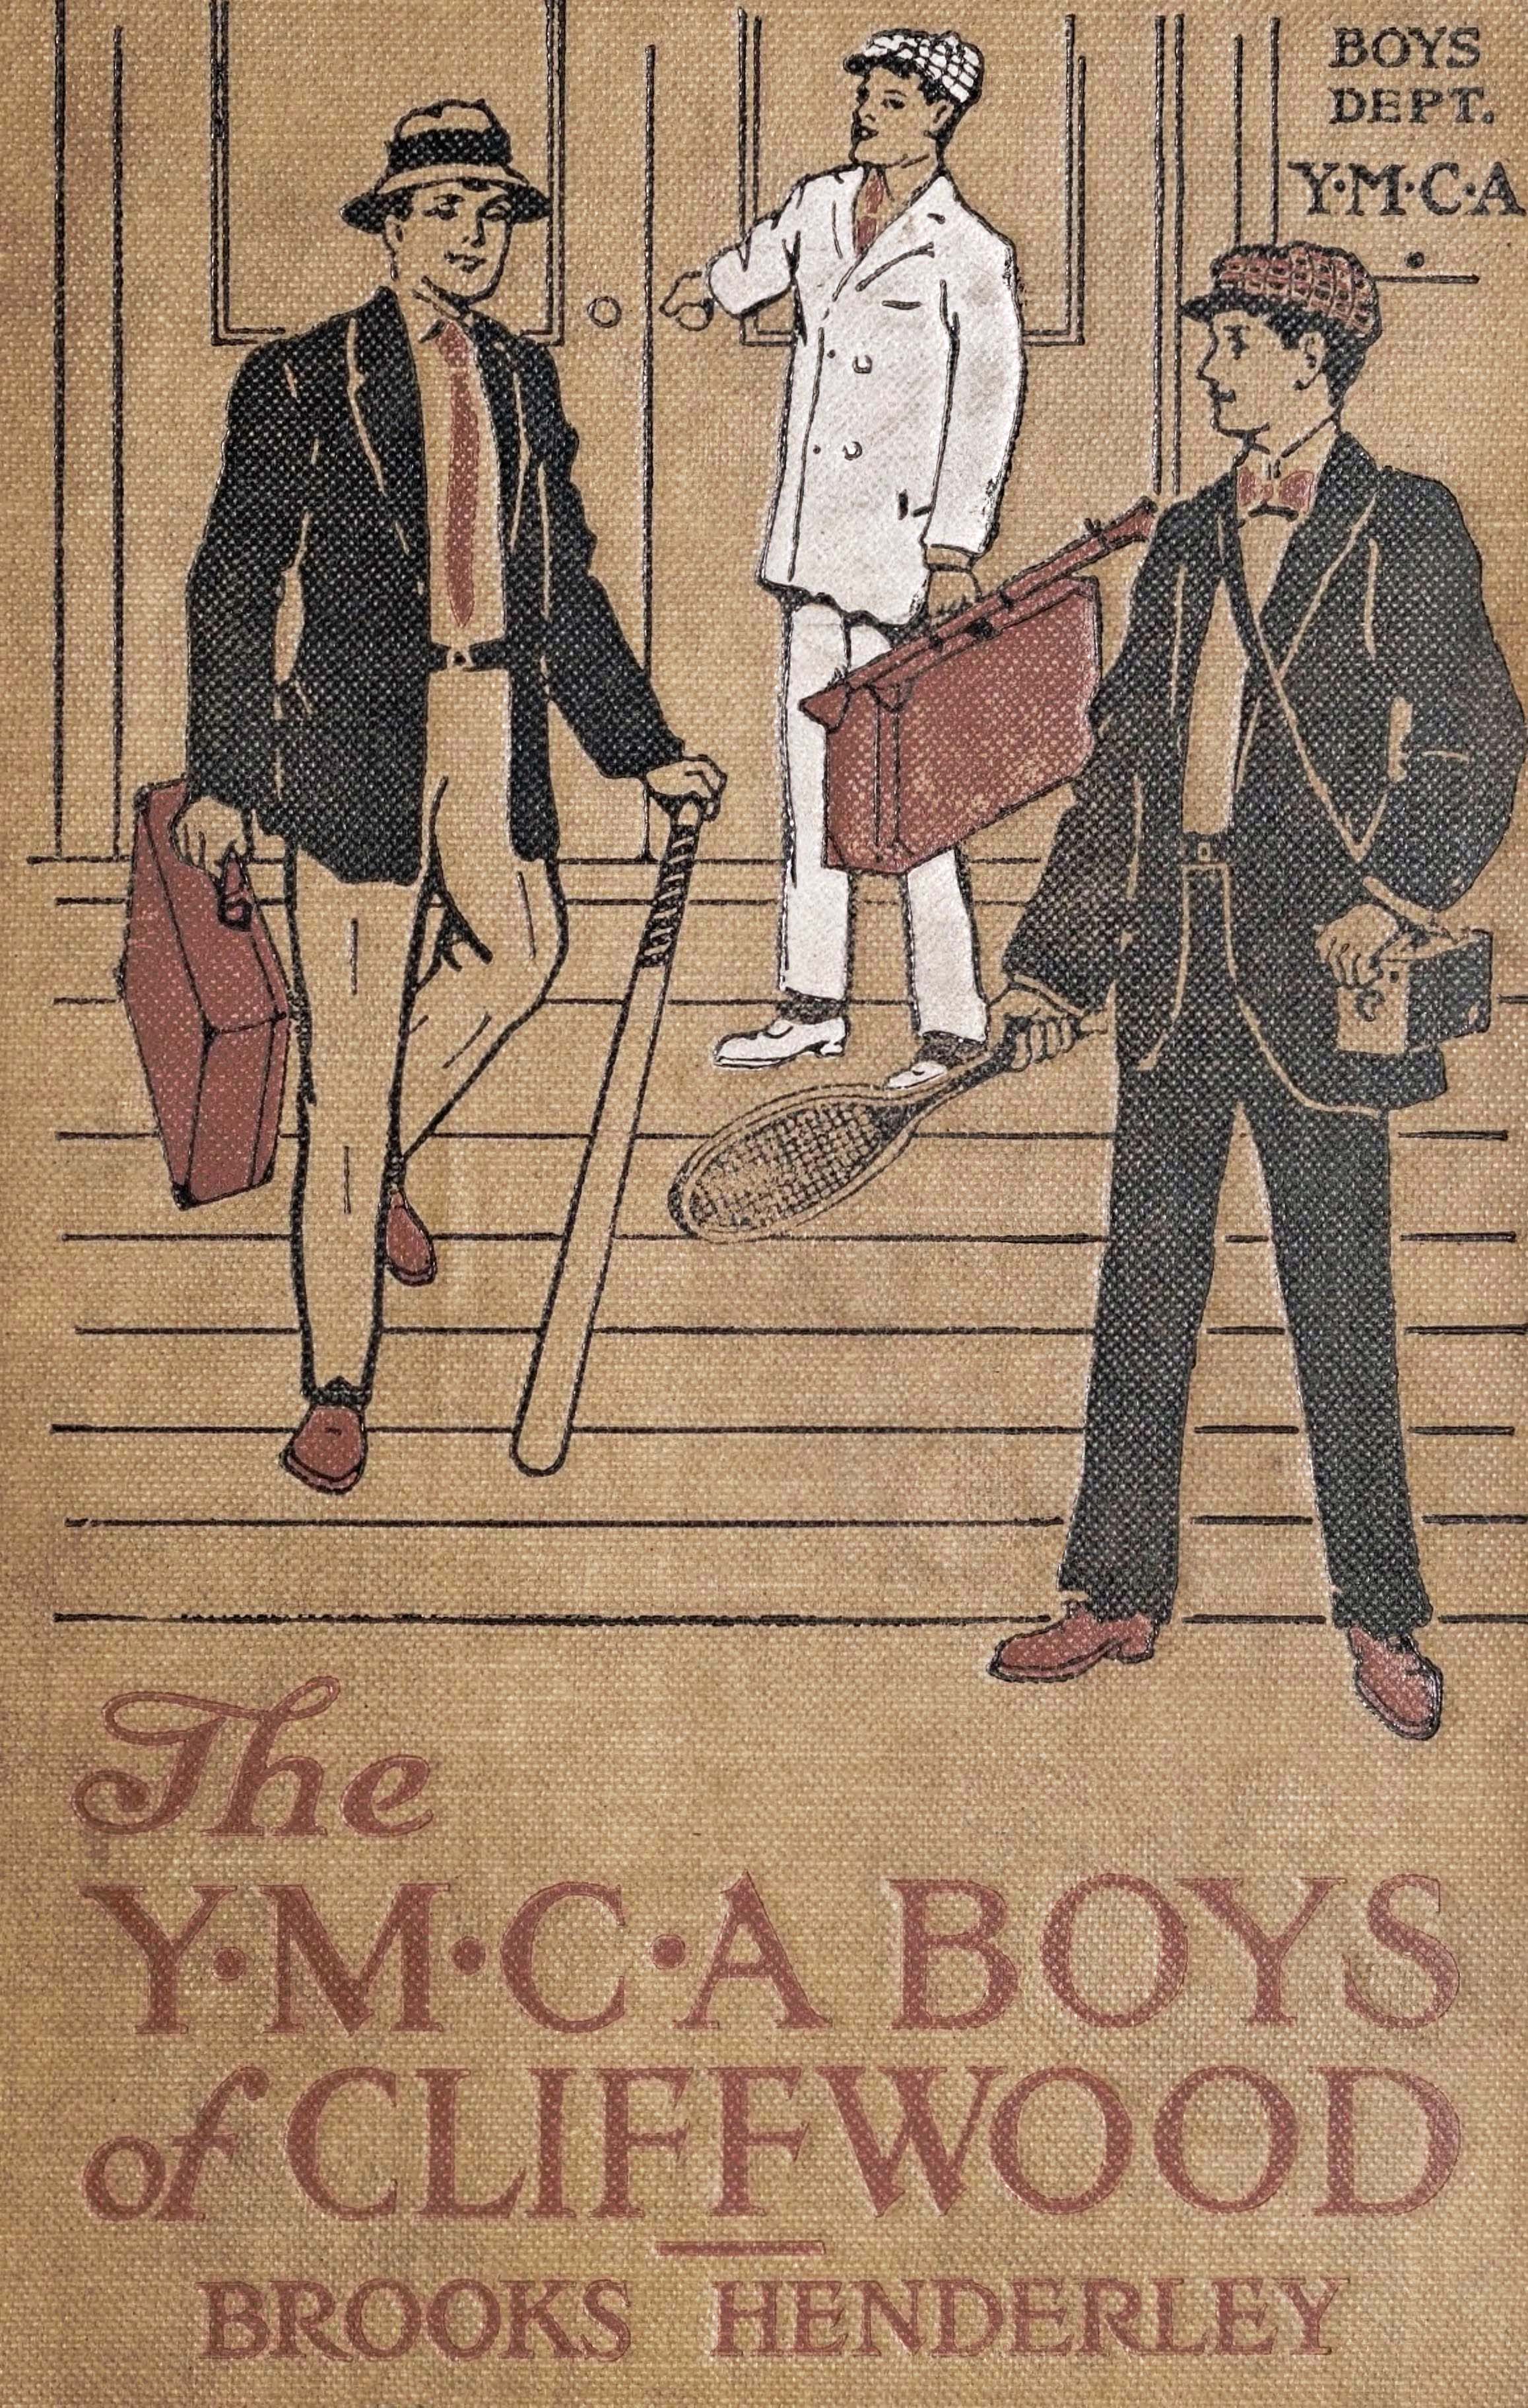 The Y. M. C. A. boys of Cliffwood;